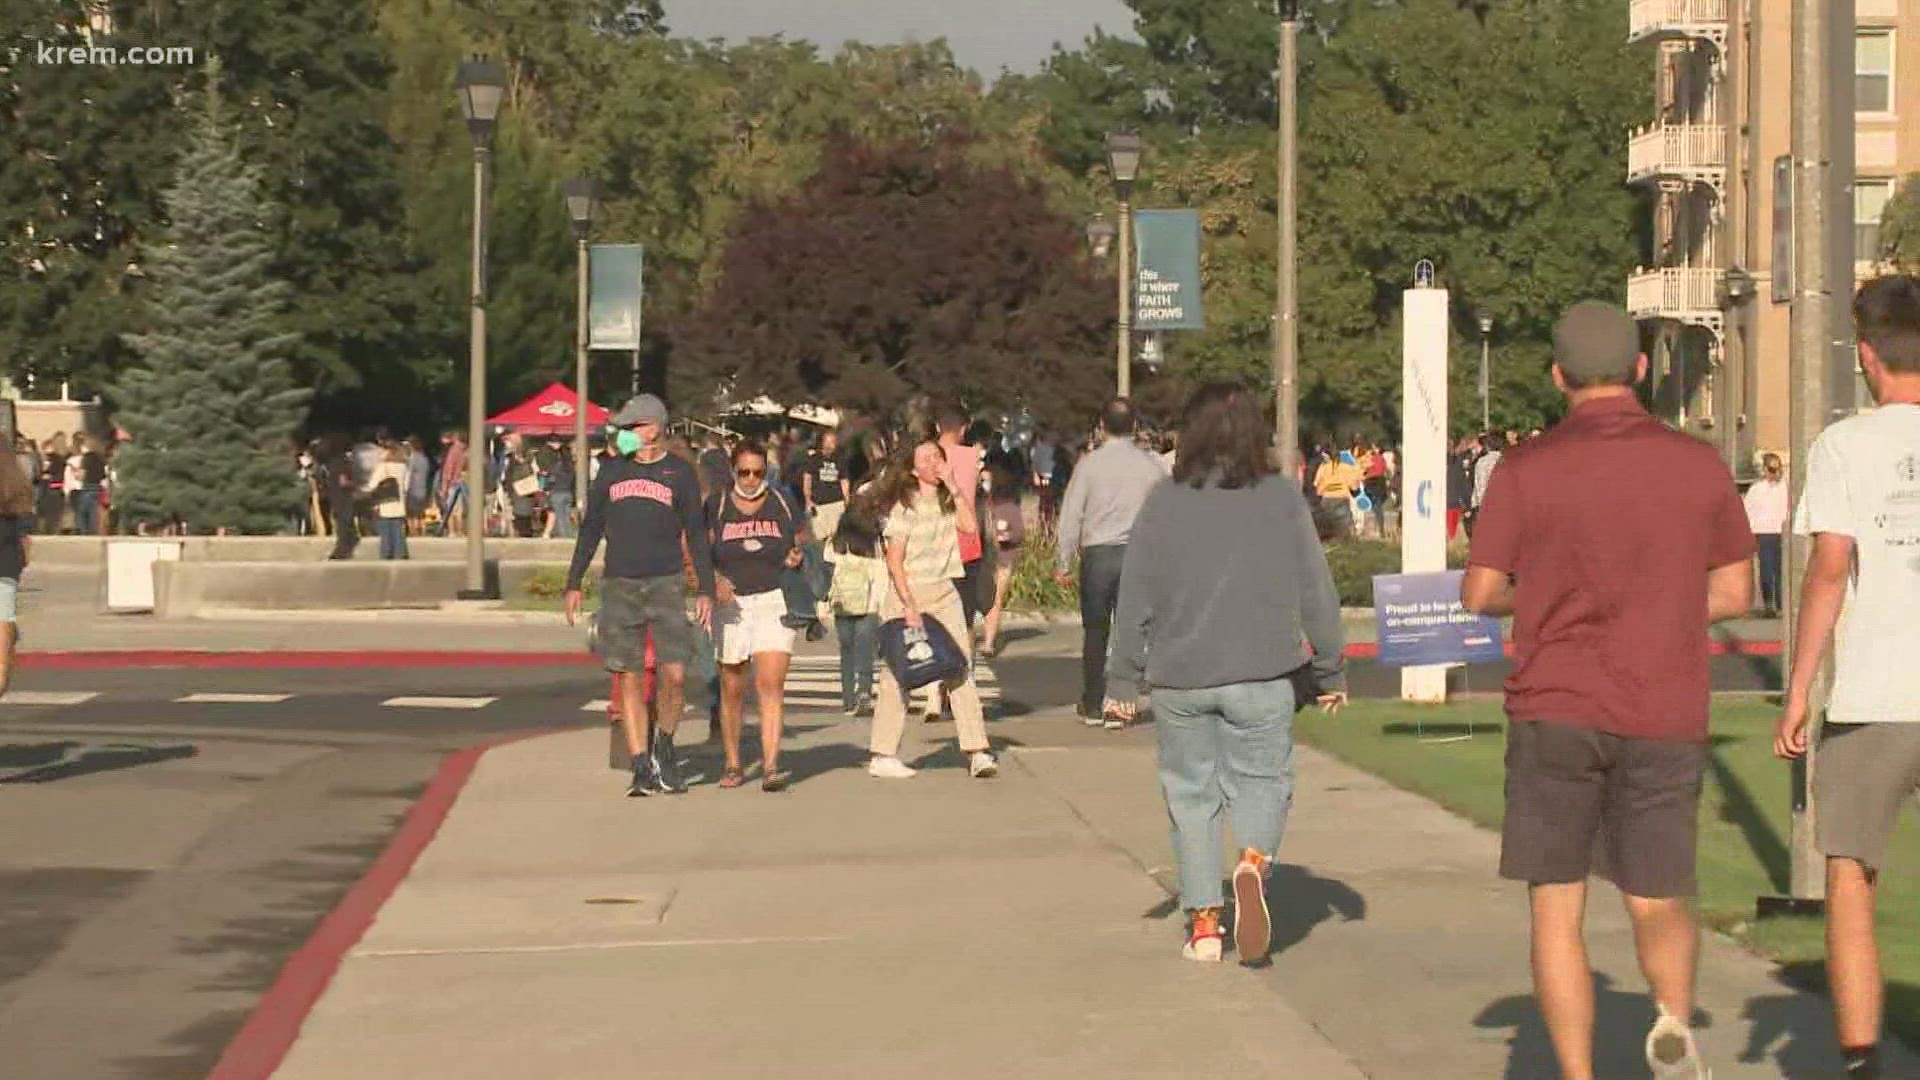 Gonzaga University is welcomed new students to campus on Friday.